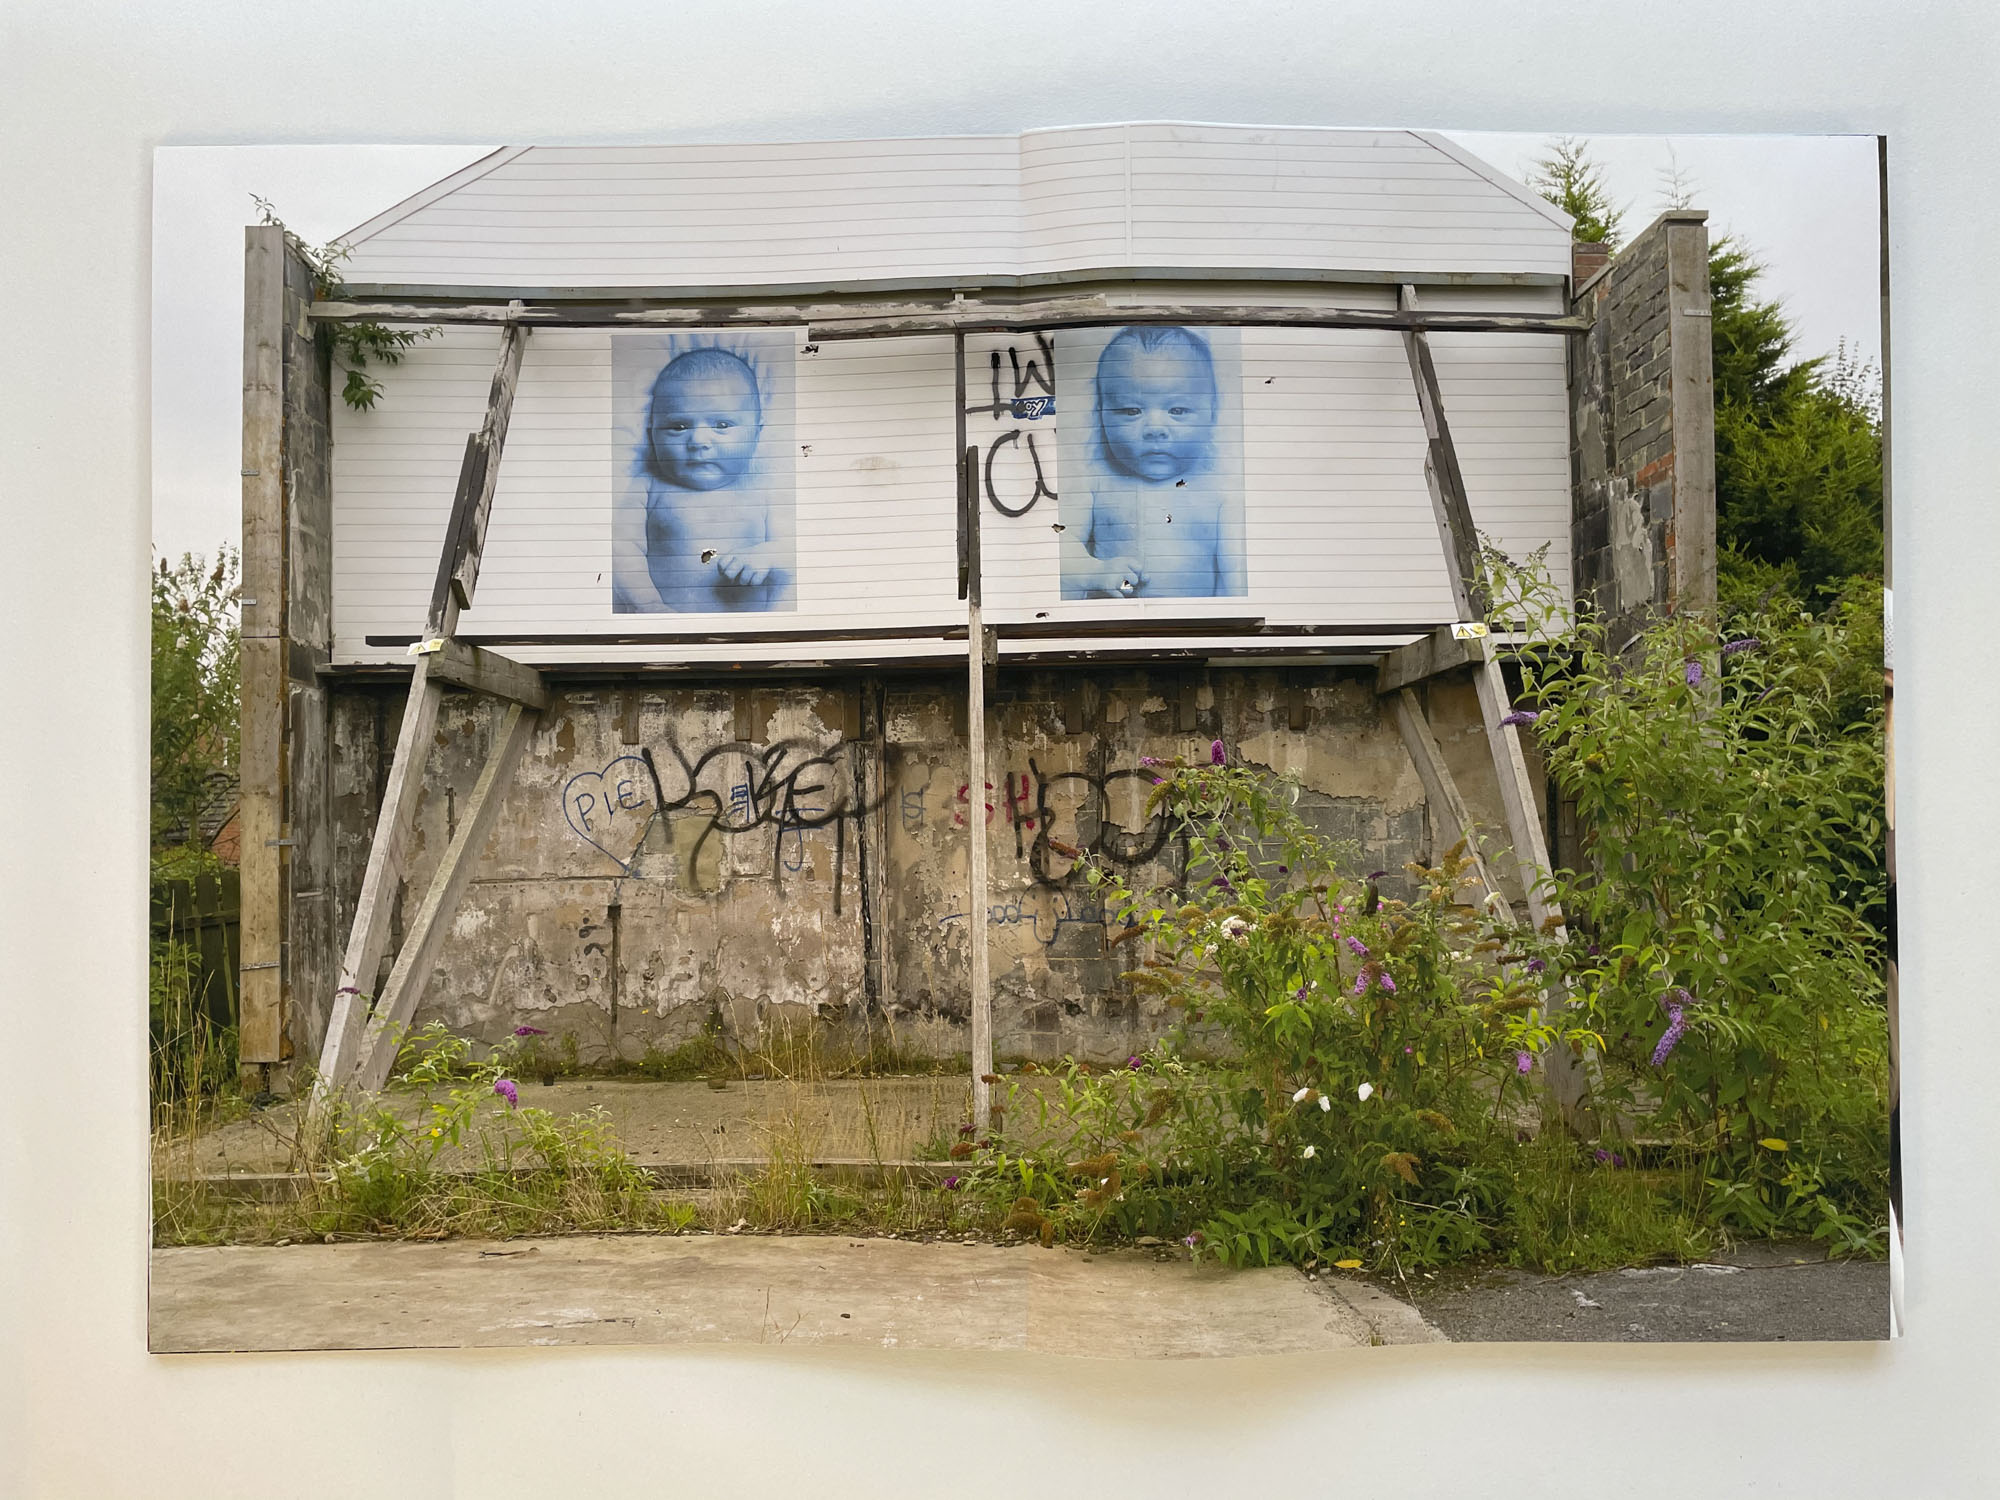 the blank end of a house is buttressed by wooden supports, on the wall are two large blue photographic prints of babies